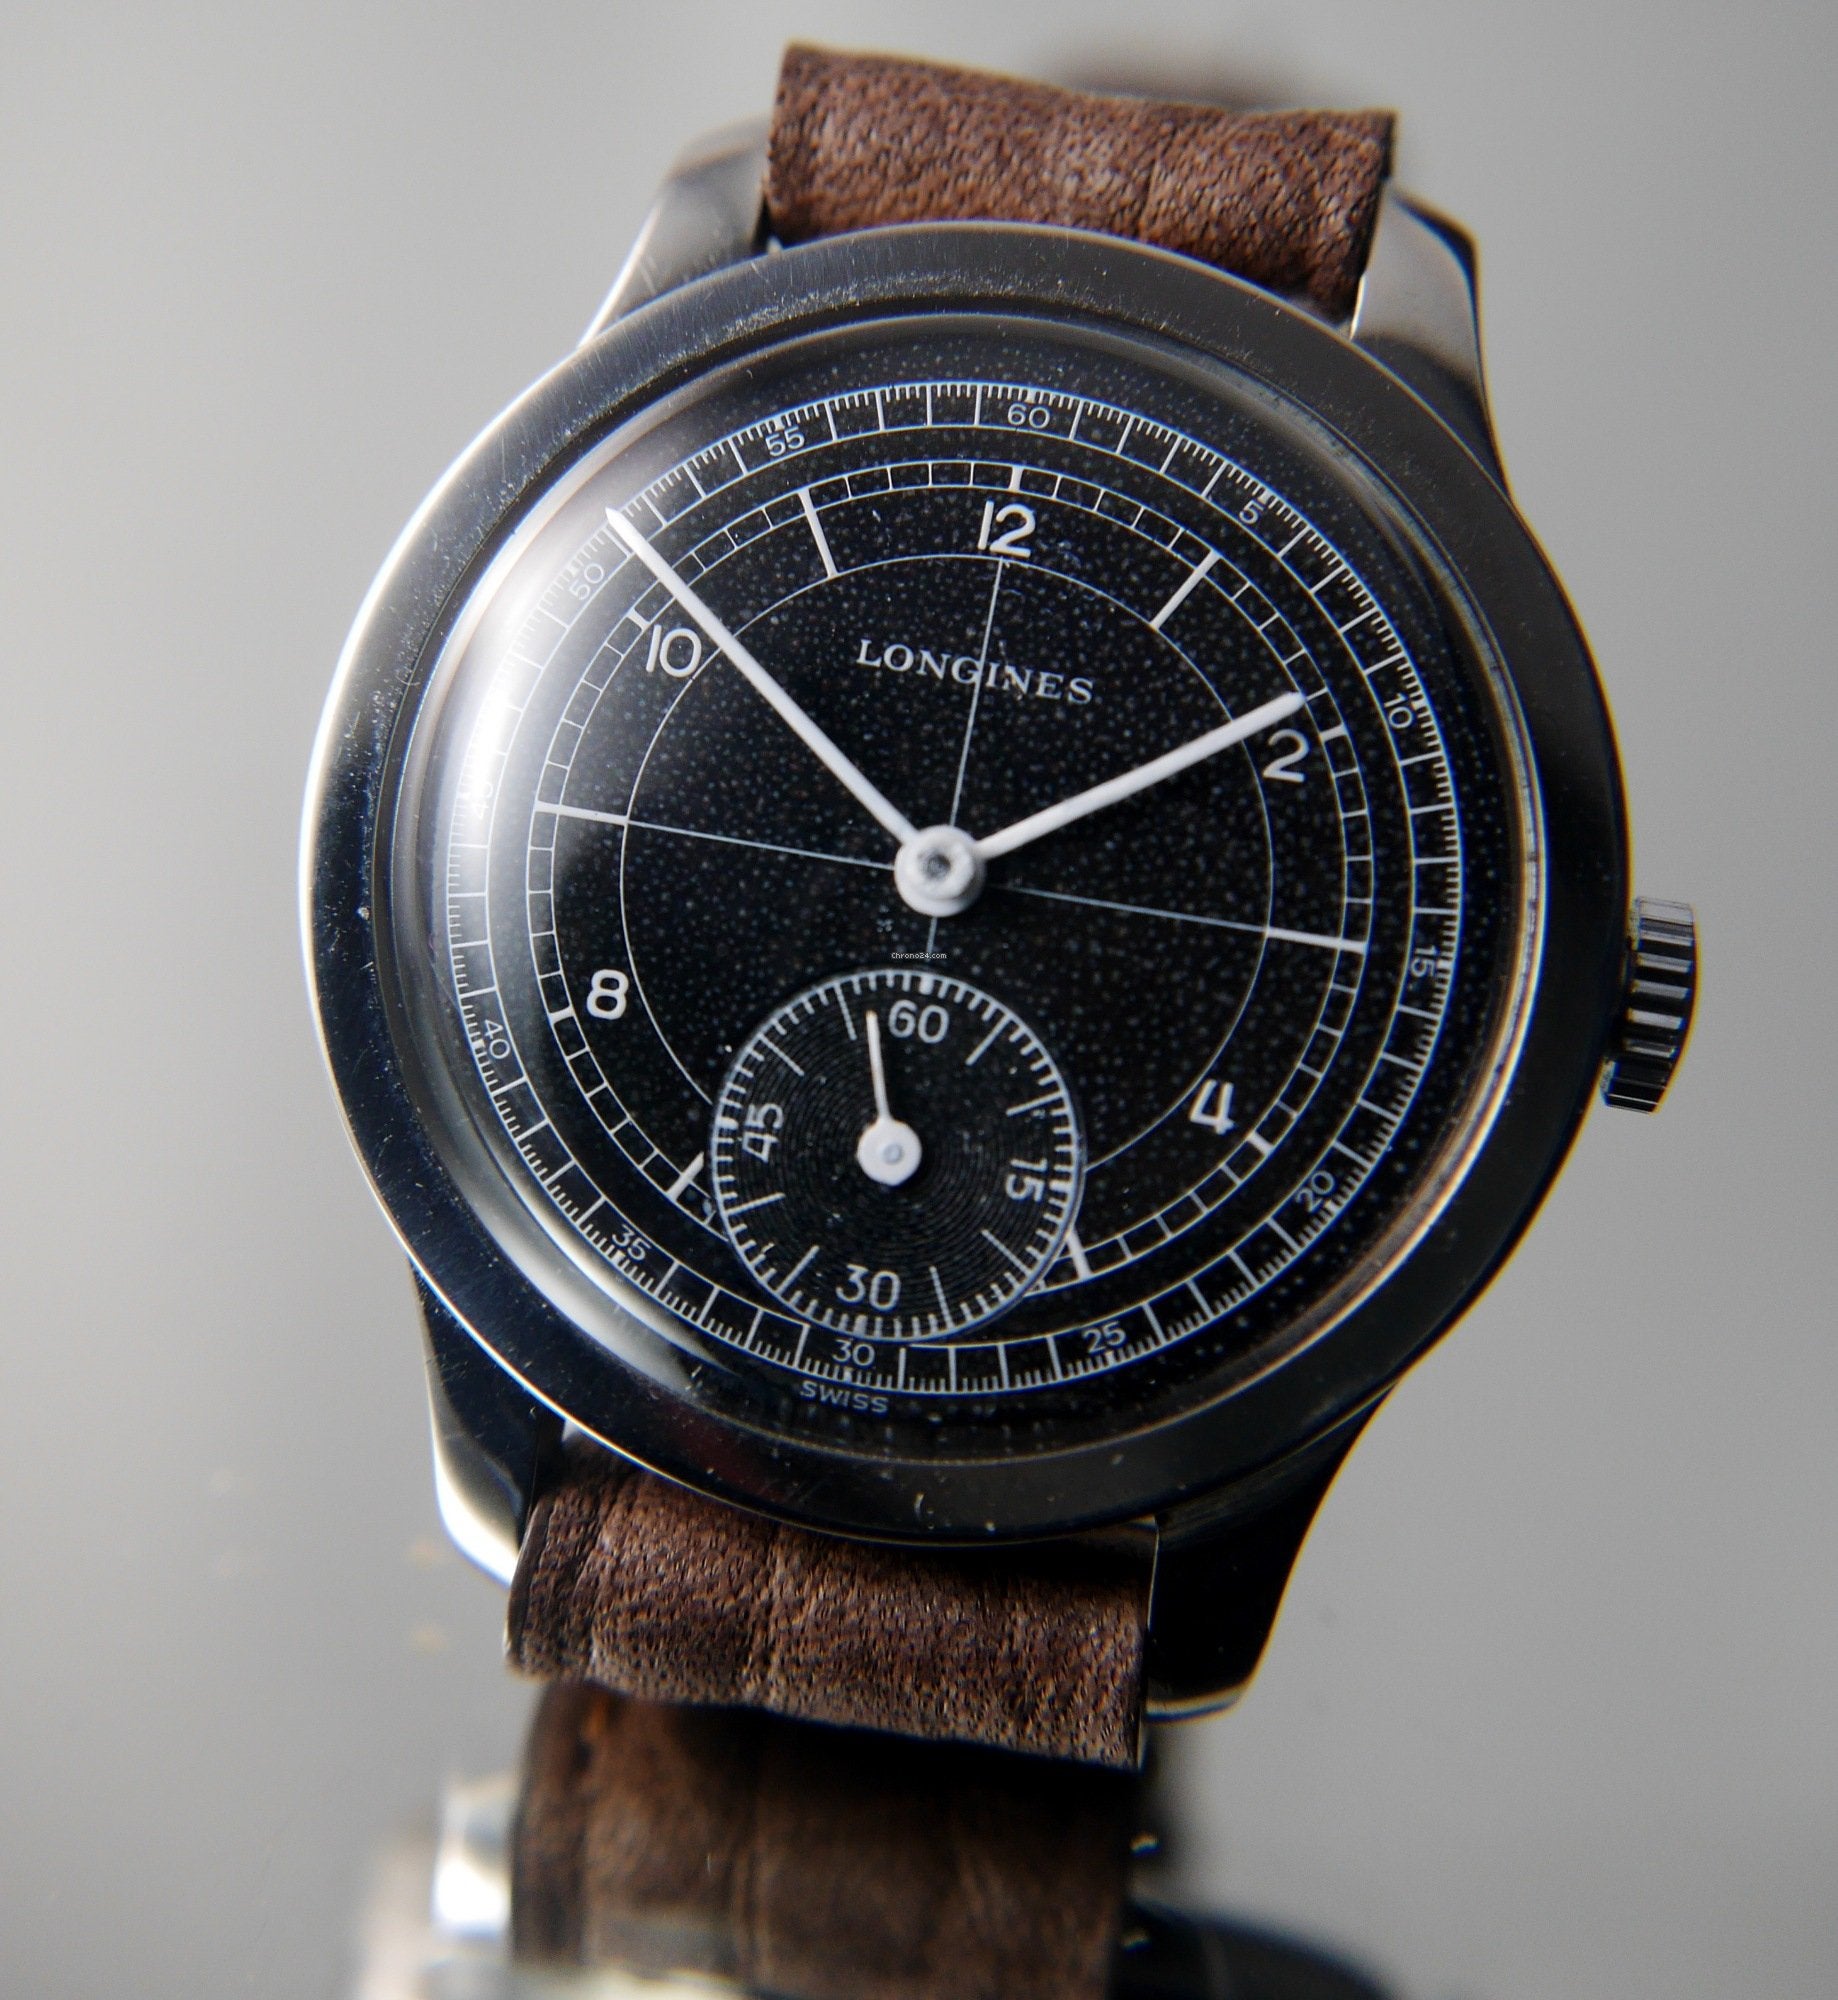 Thoughts on this sector dial cal  ? | WatchUSeek Watch Forums